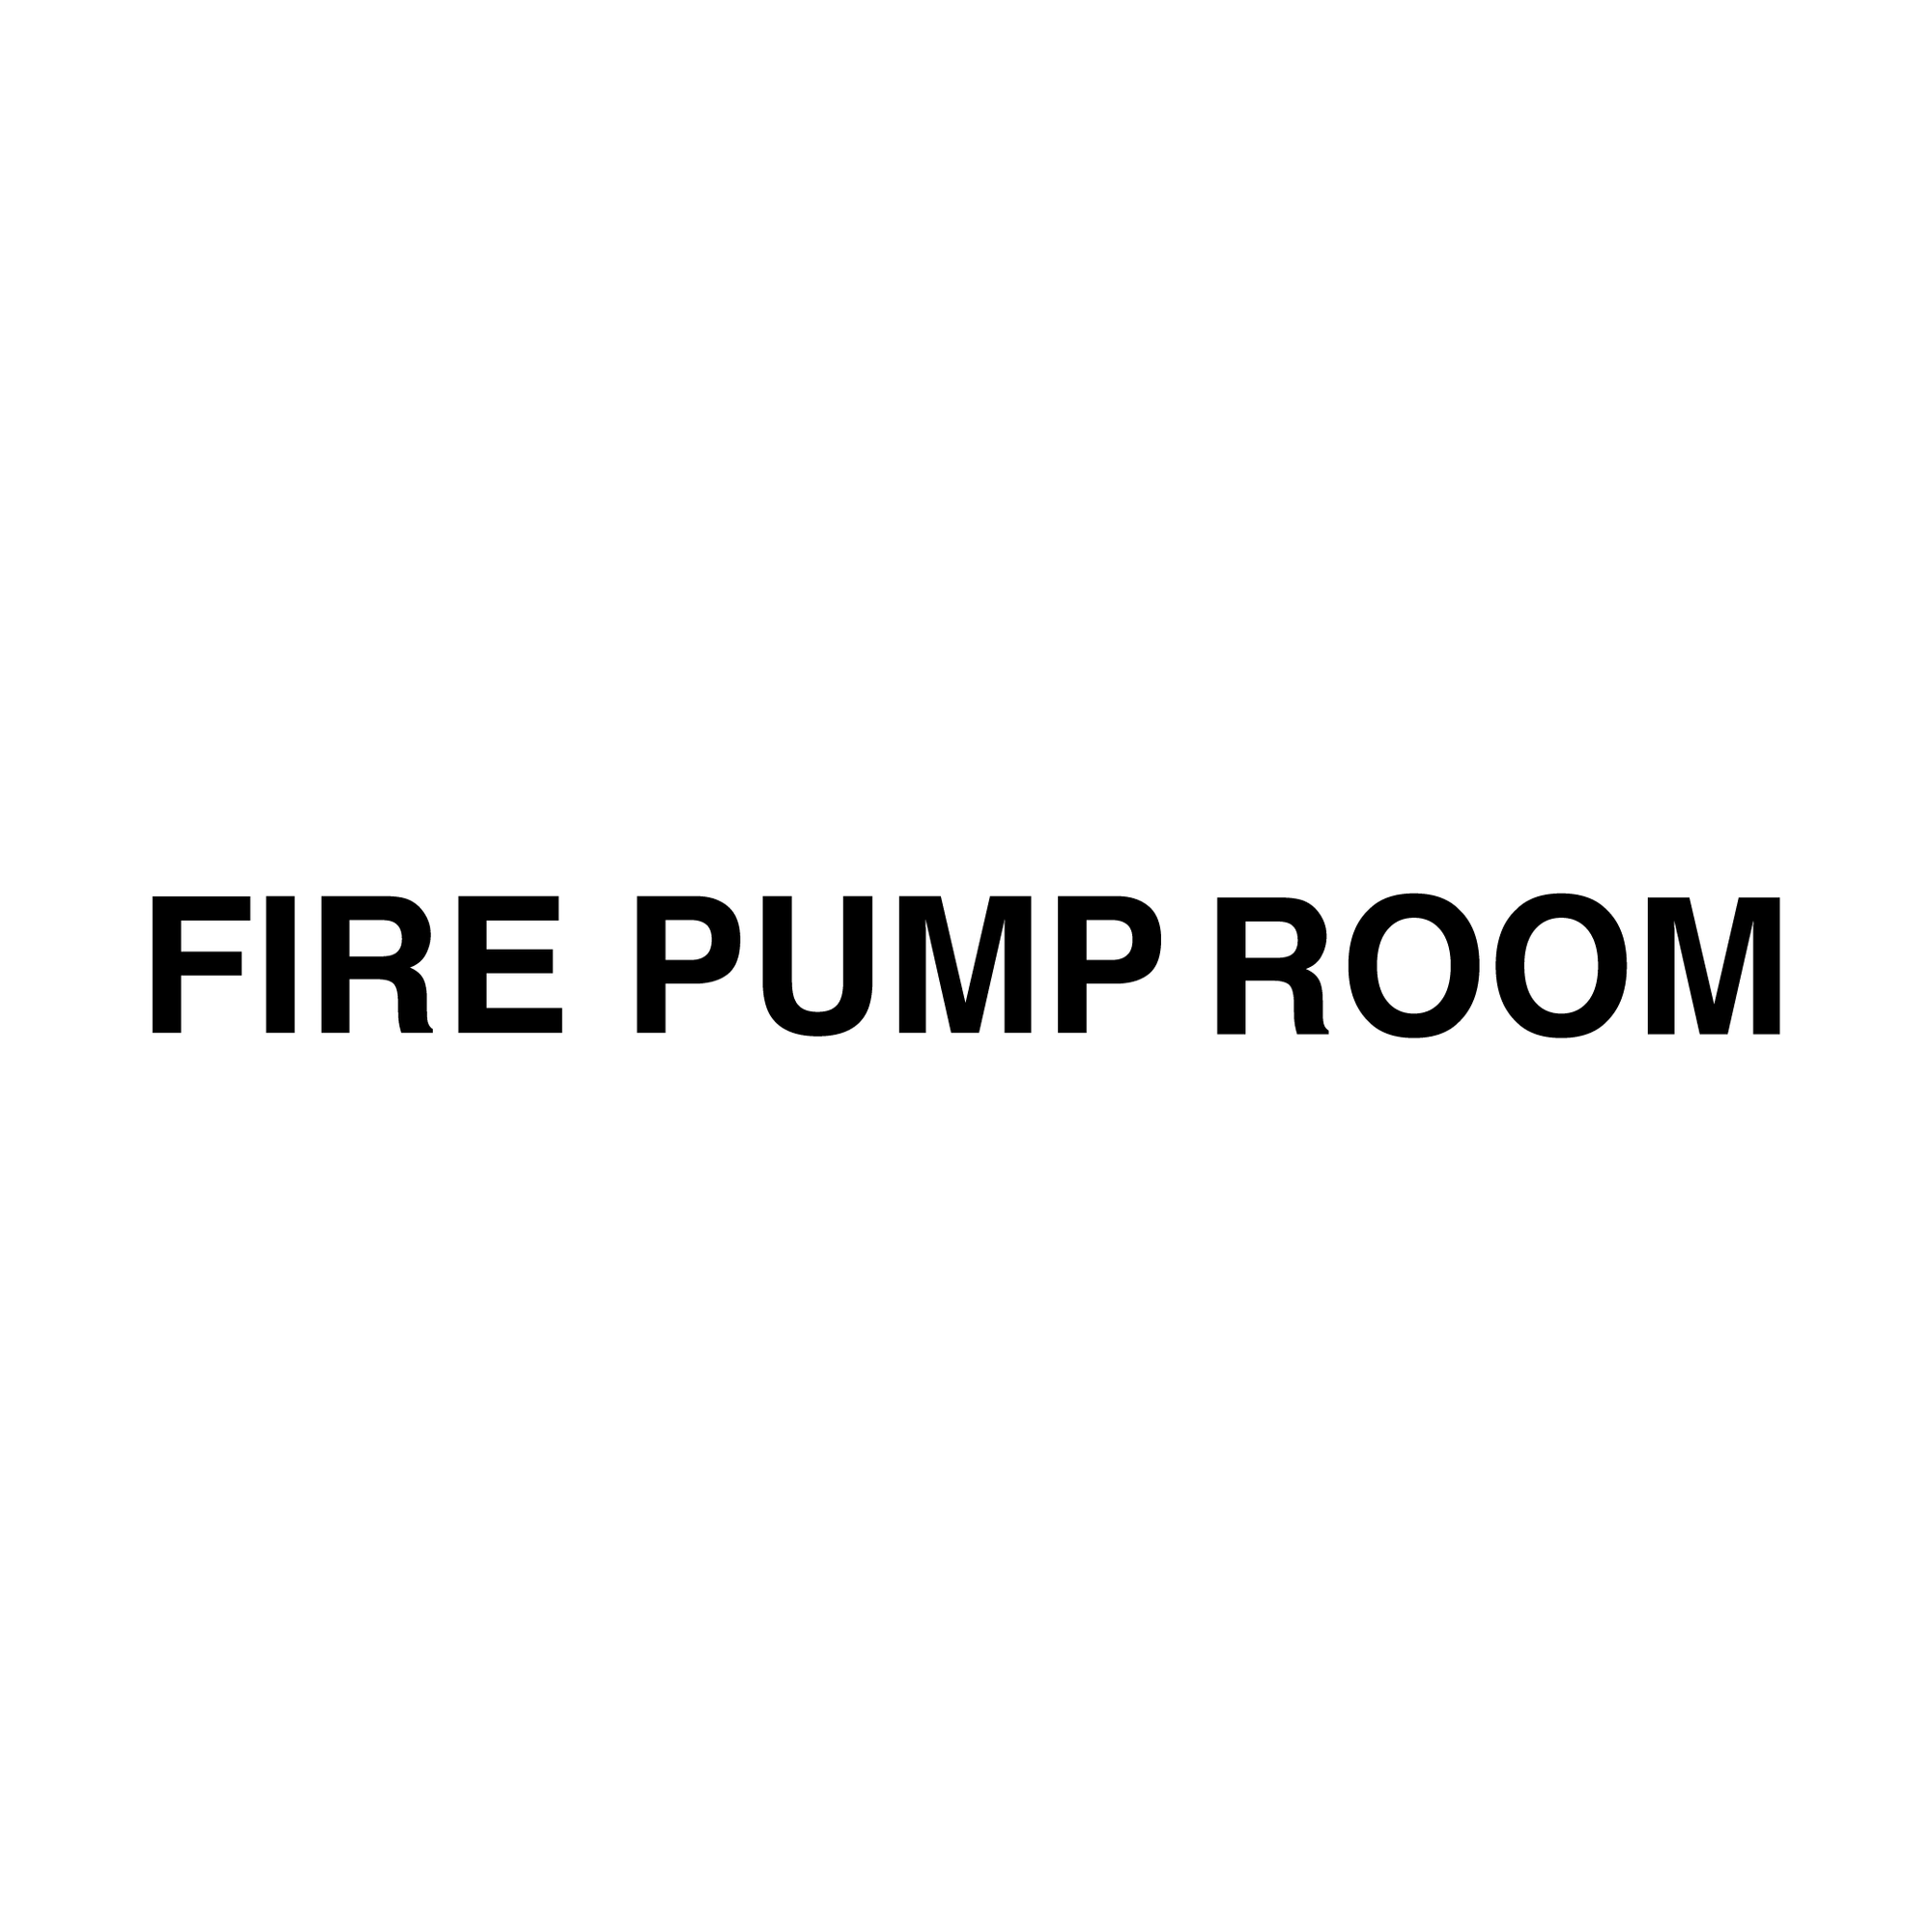 Fire Safety Stickers - FIRE PUMP ROOM